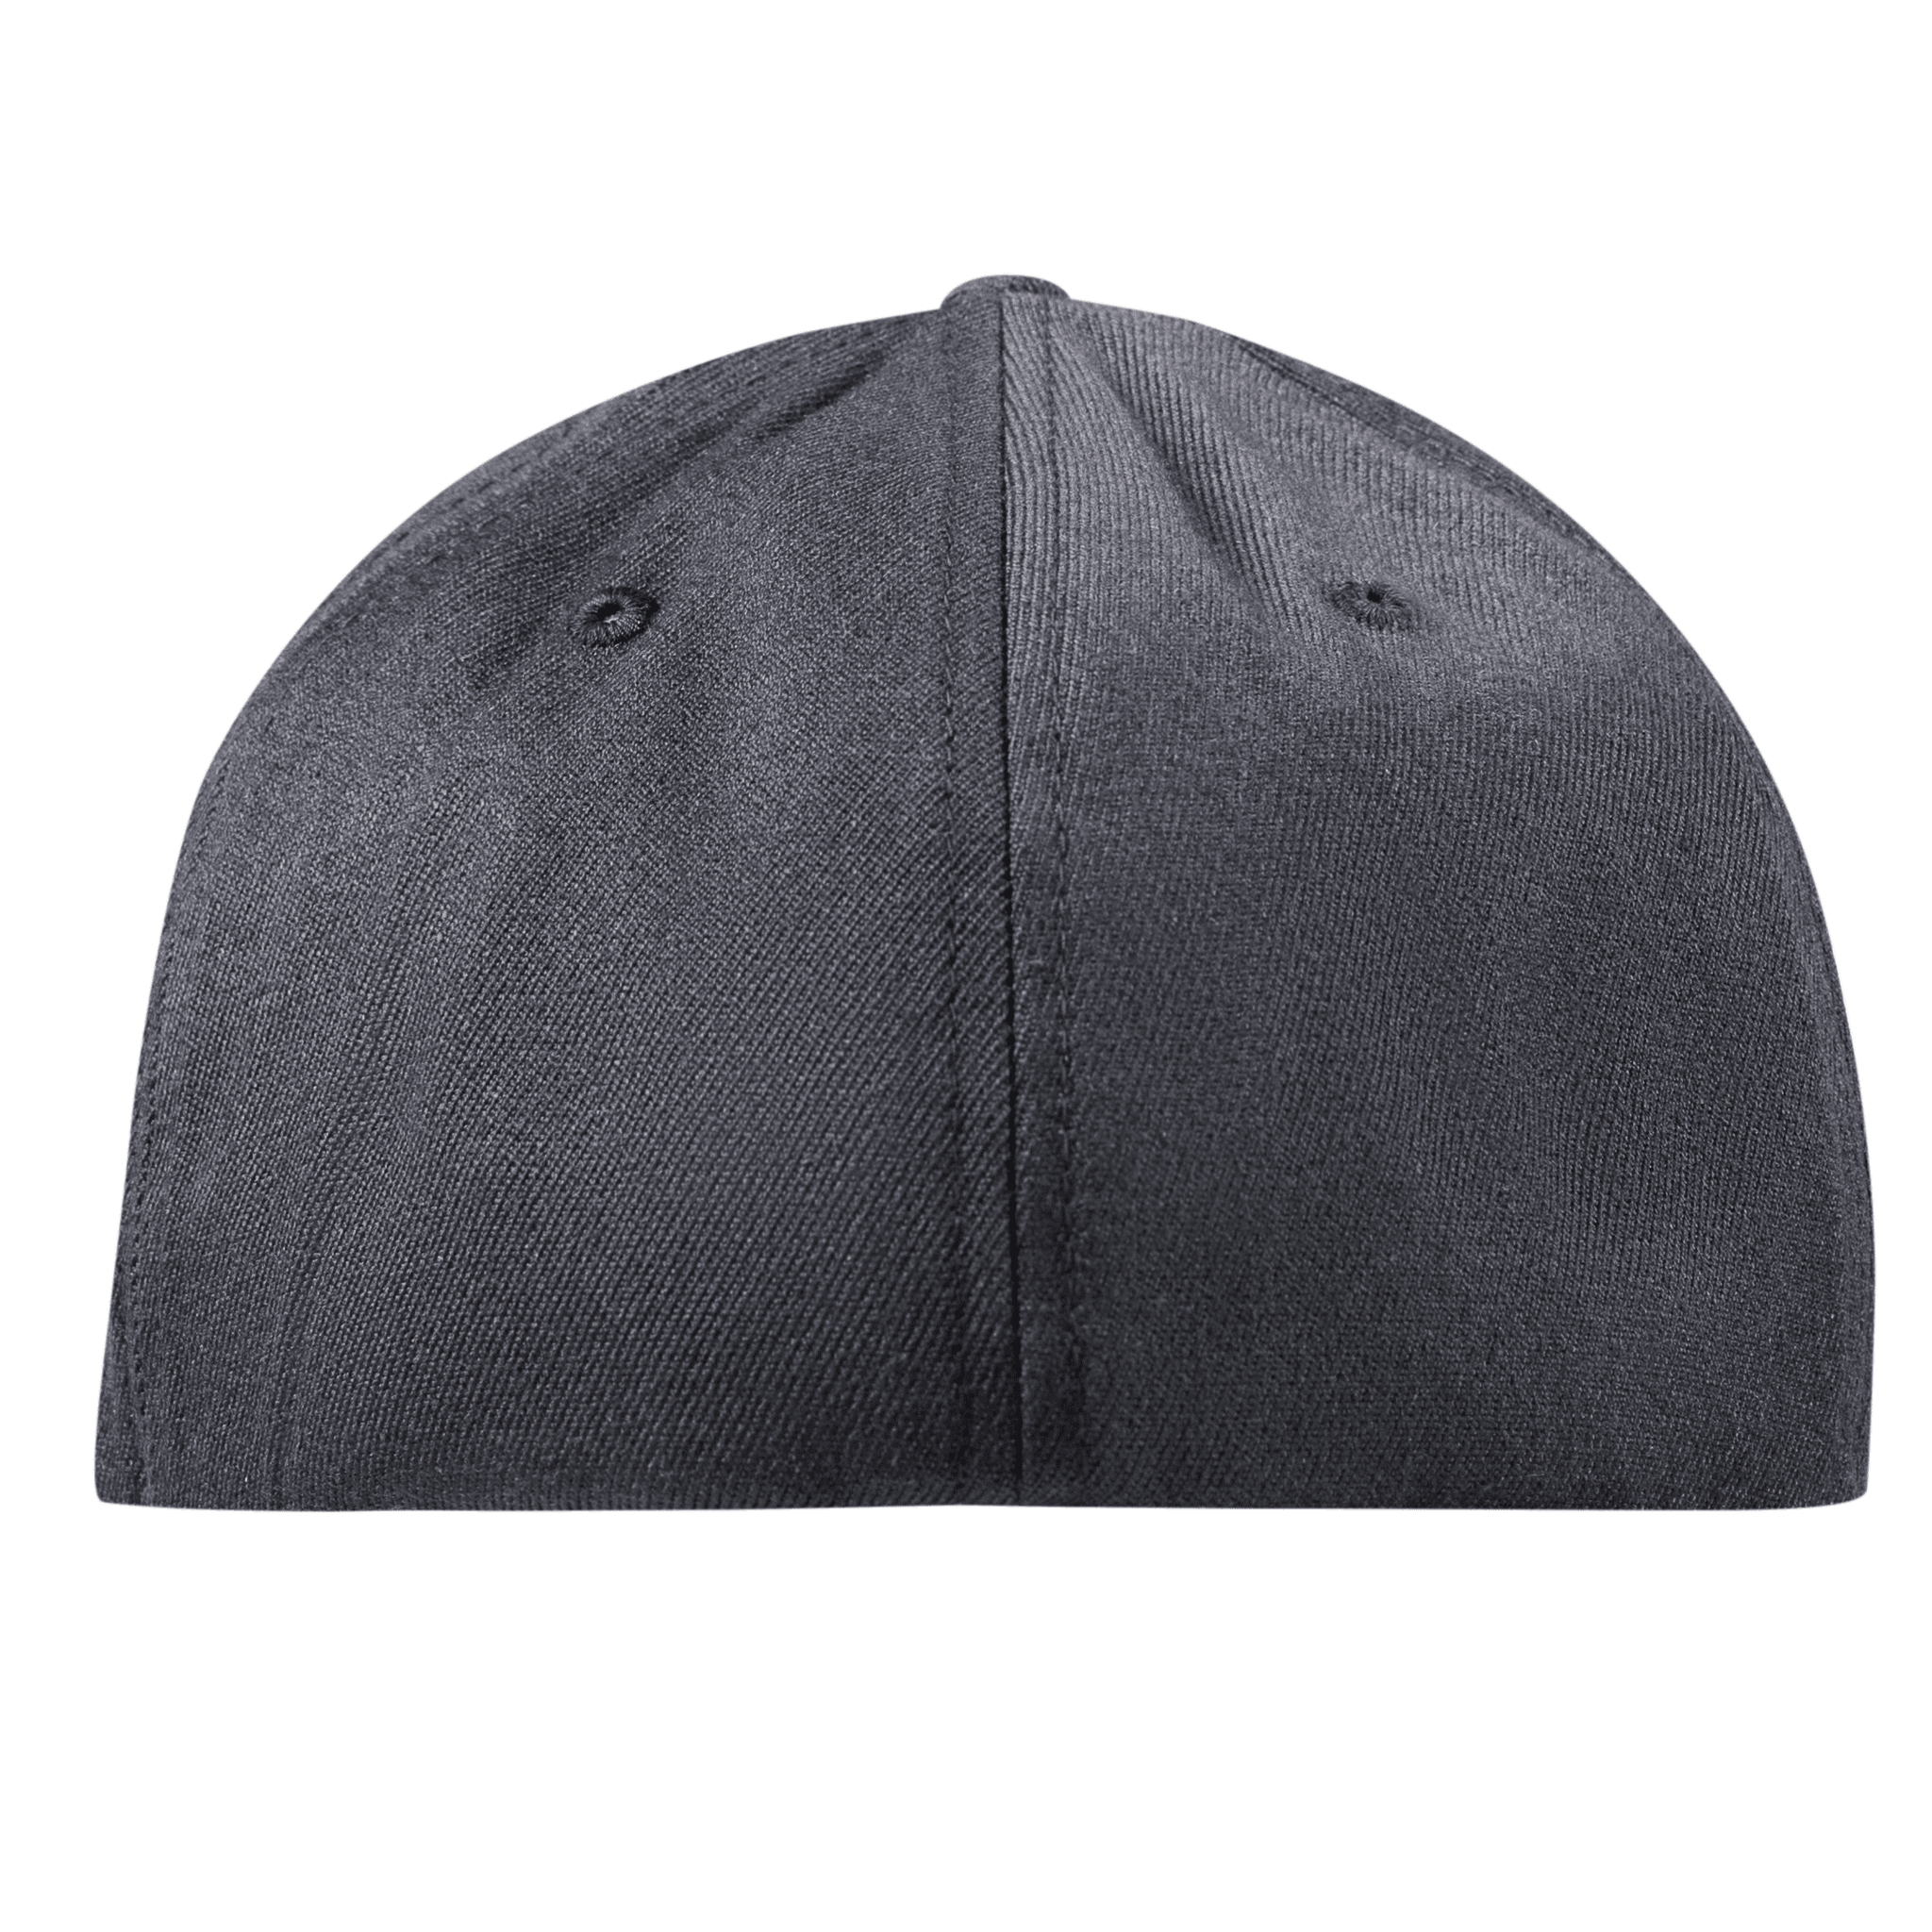 Wyoming 44 Midnight Flexfit Fitted Back Charcoal